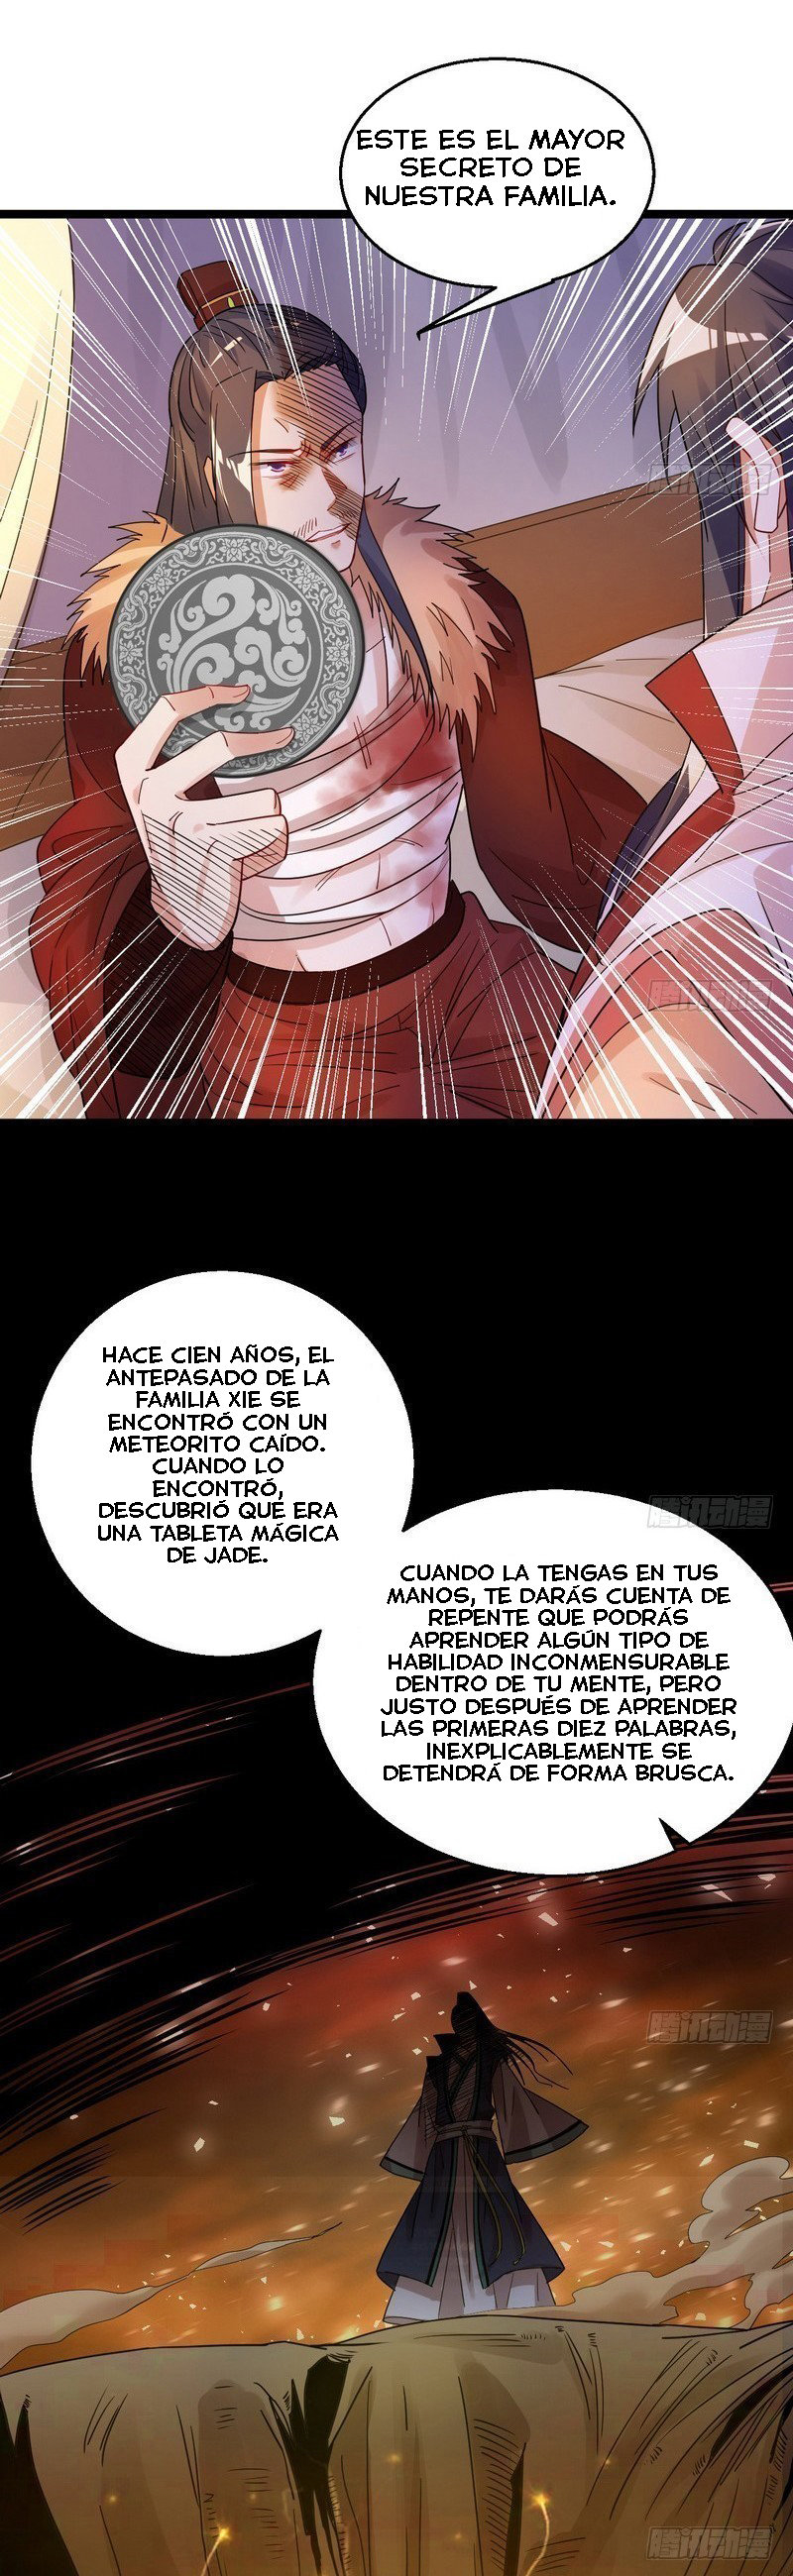 Manga Soy un dios maligno Chapter 5 image number 7